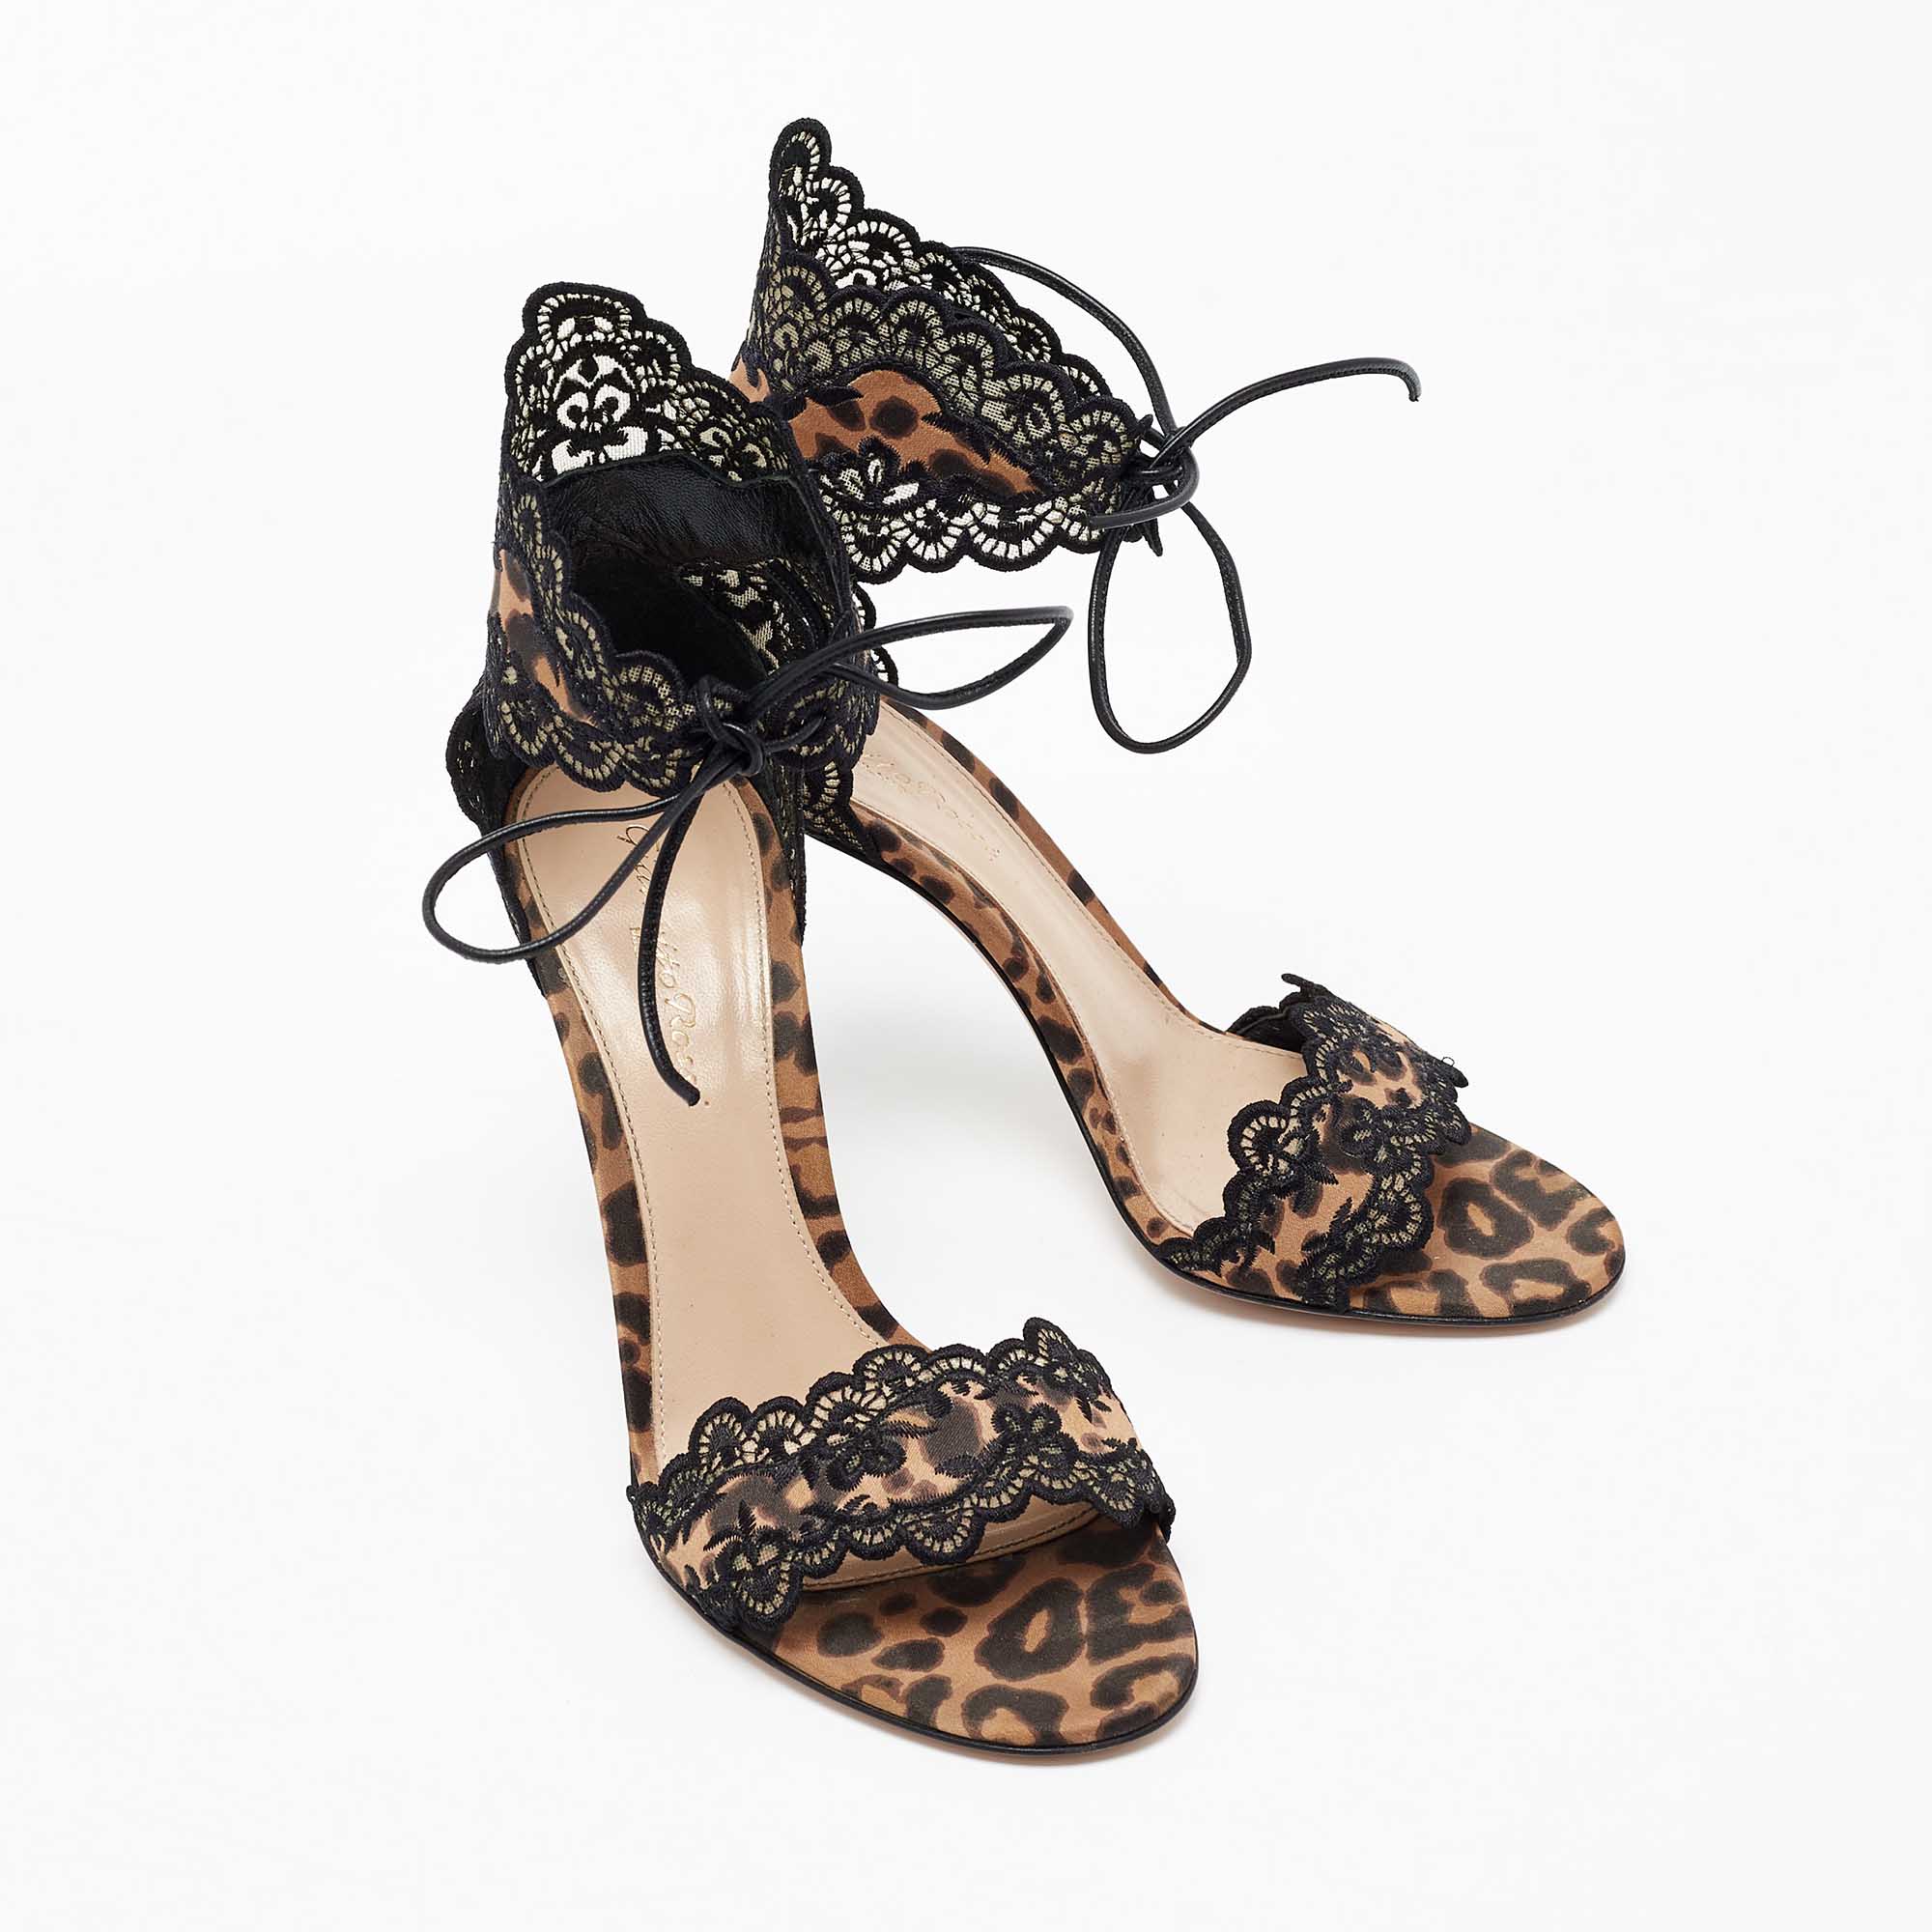 Gianvito Rossi Black/Brown Lace And Leopard Print Satin Ankle-Tie Sandals Size 36